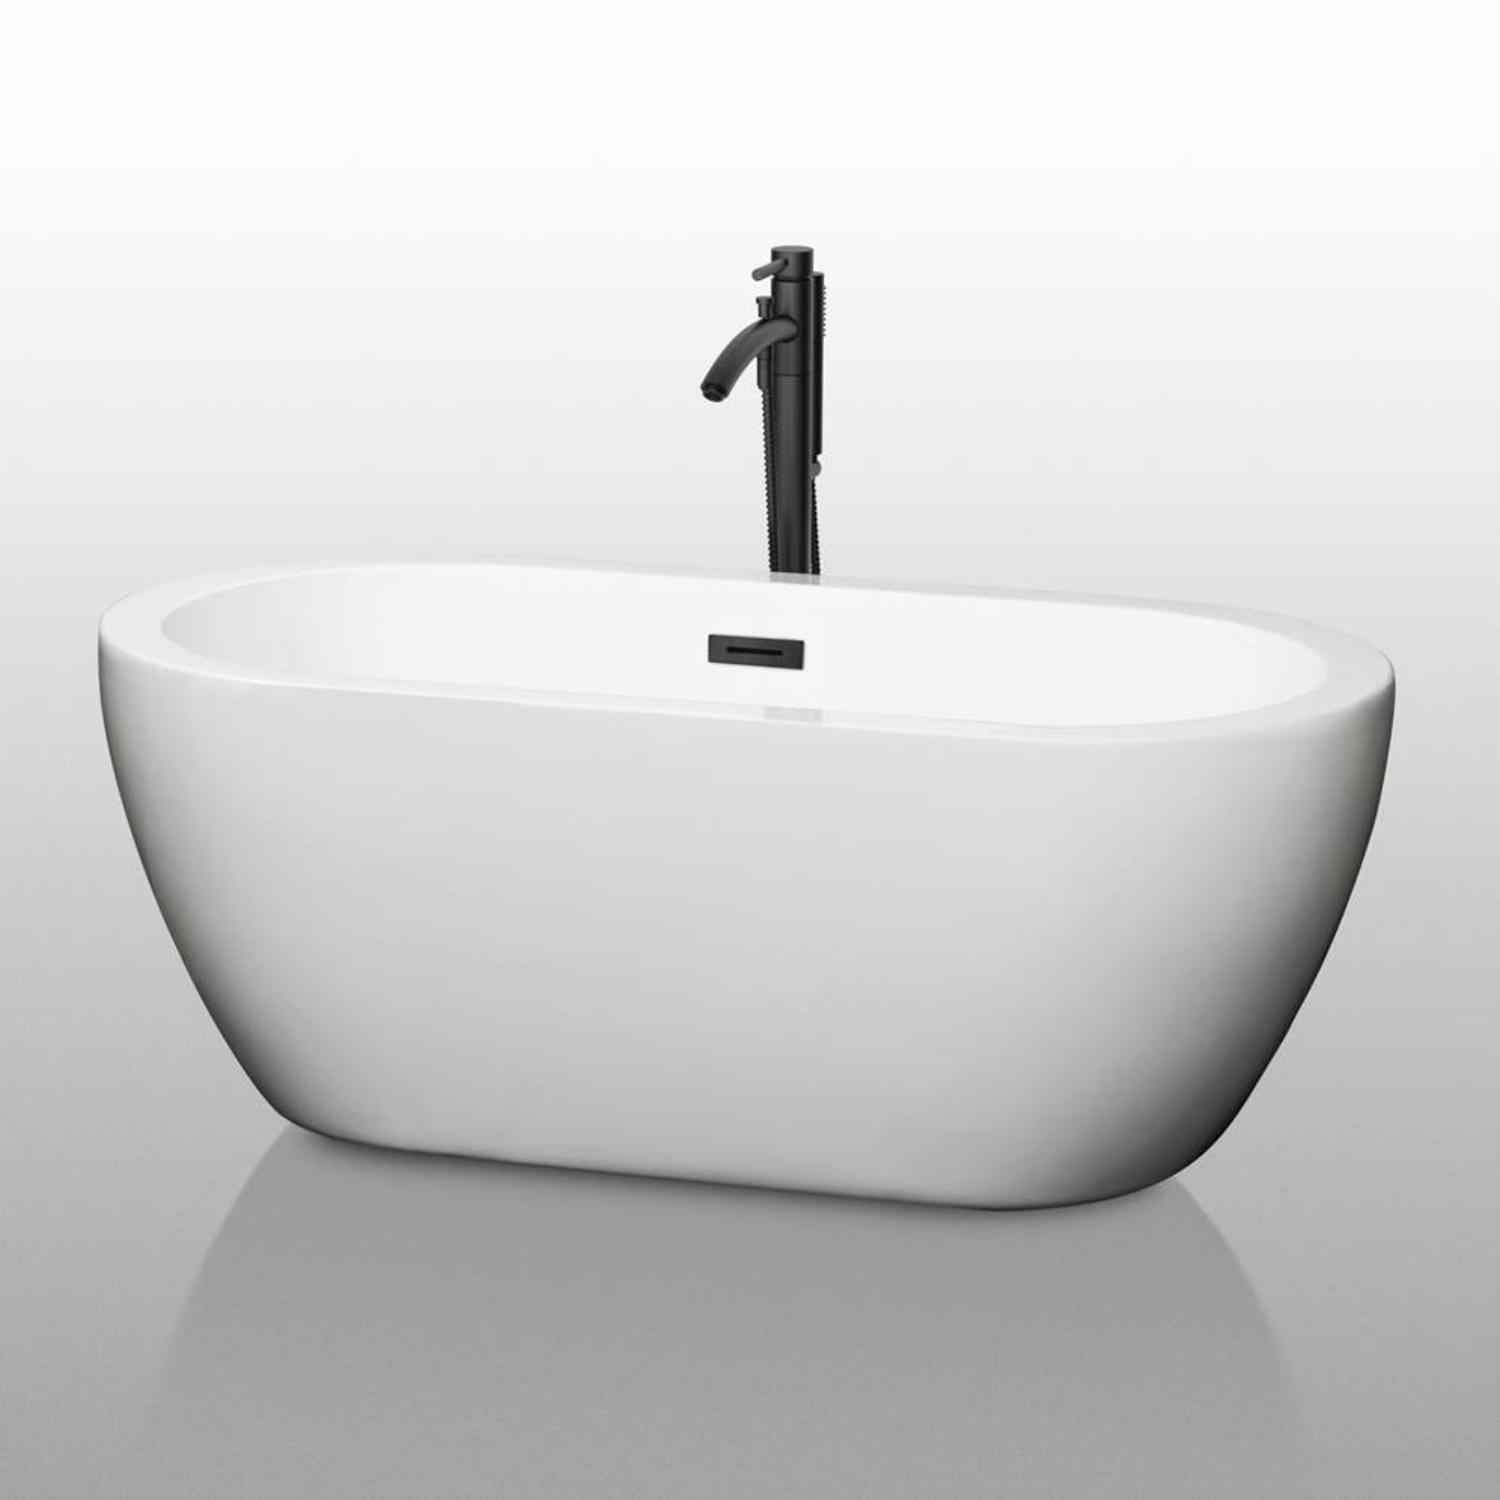 Wyndham collection Soho 60 Inch Freestanding Bathtub in White front view